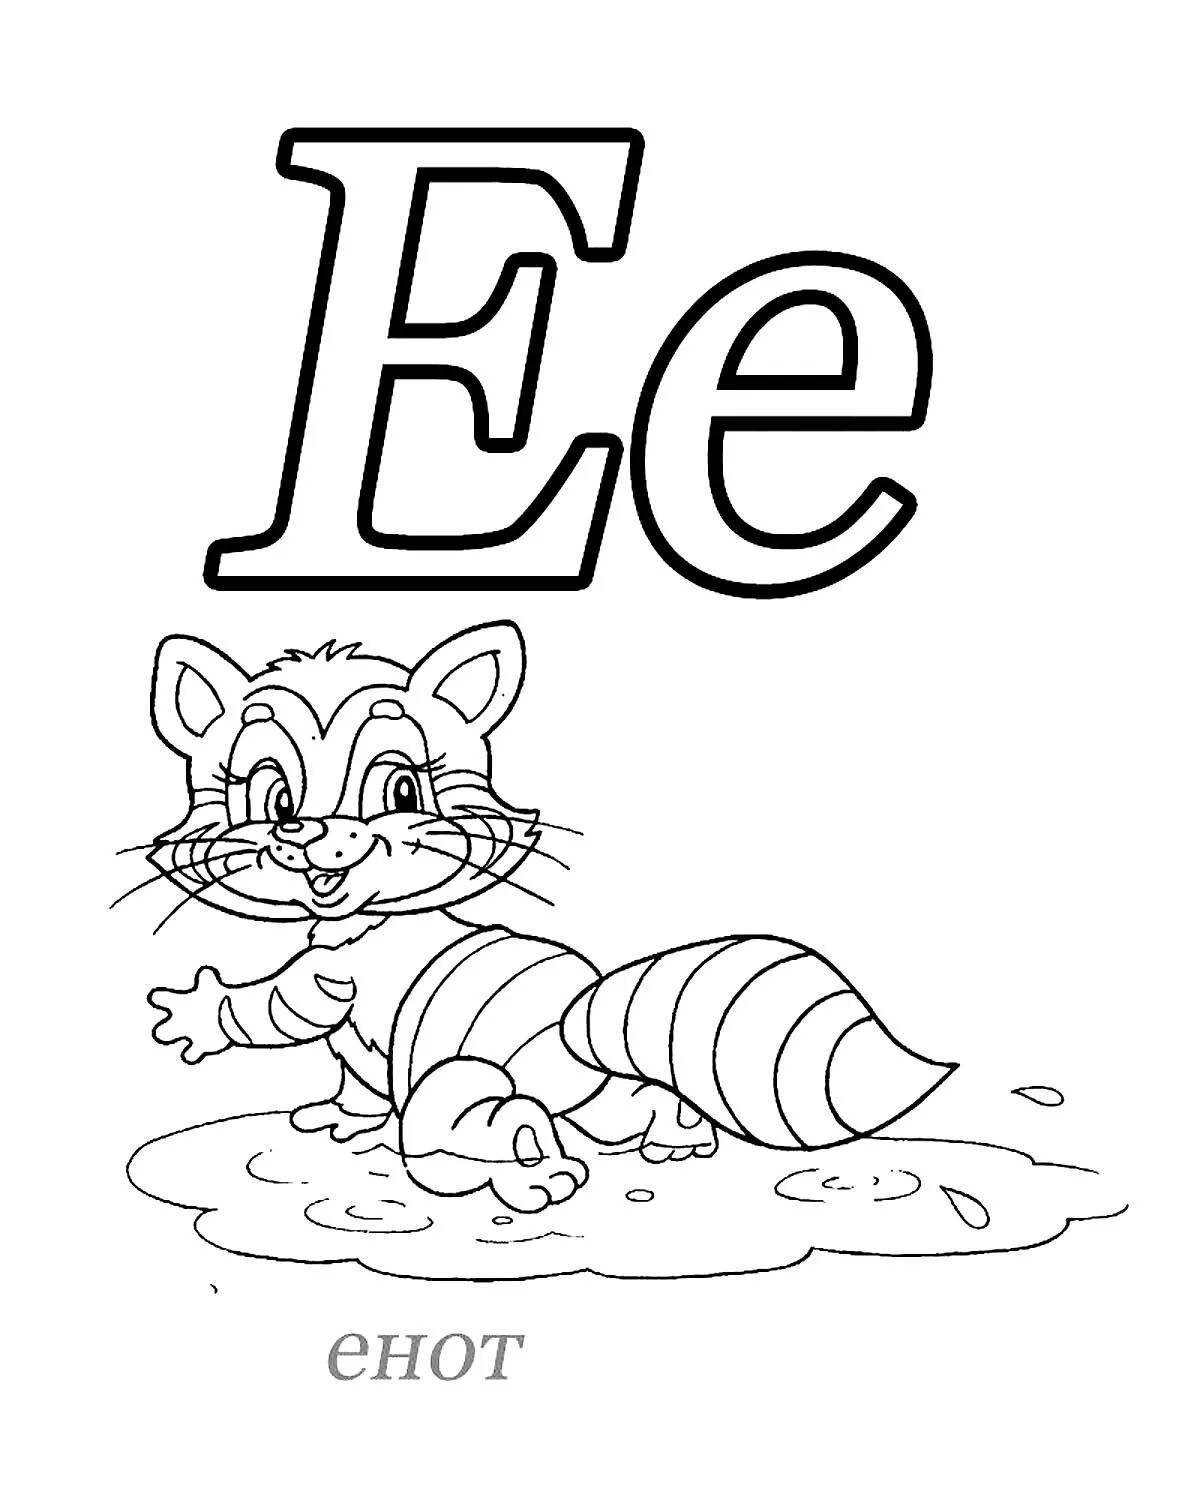 Colorful letter e coloring book for kids